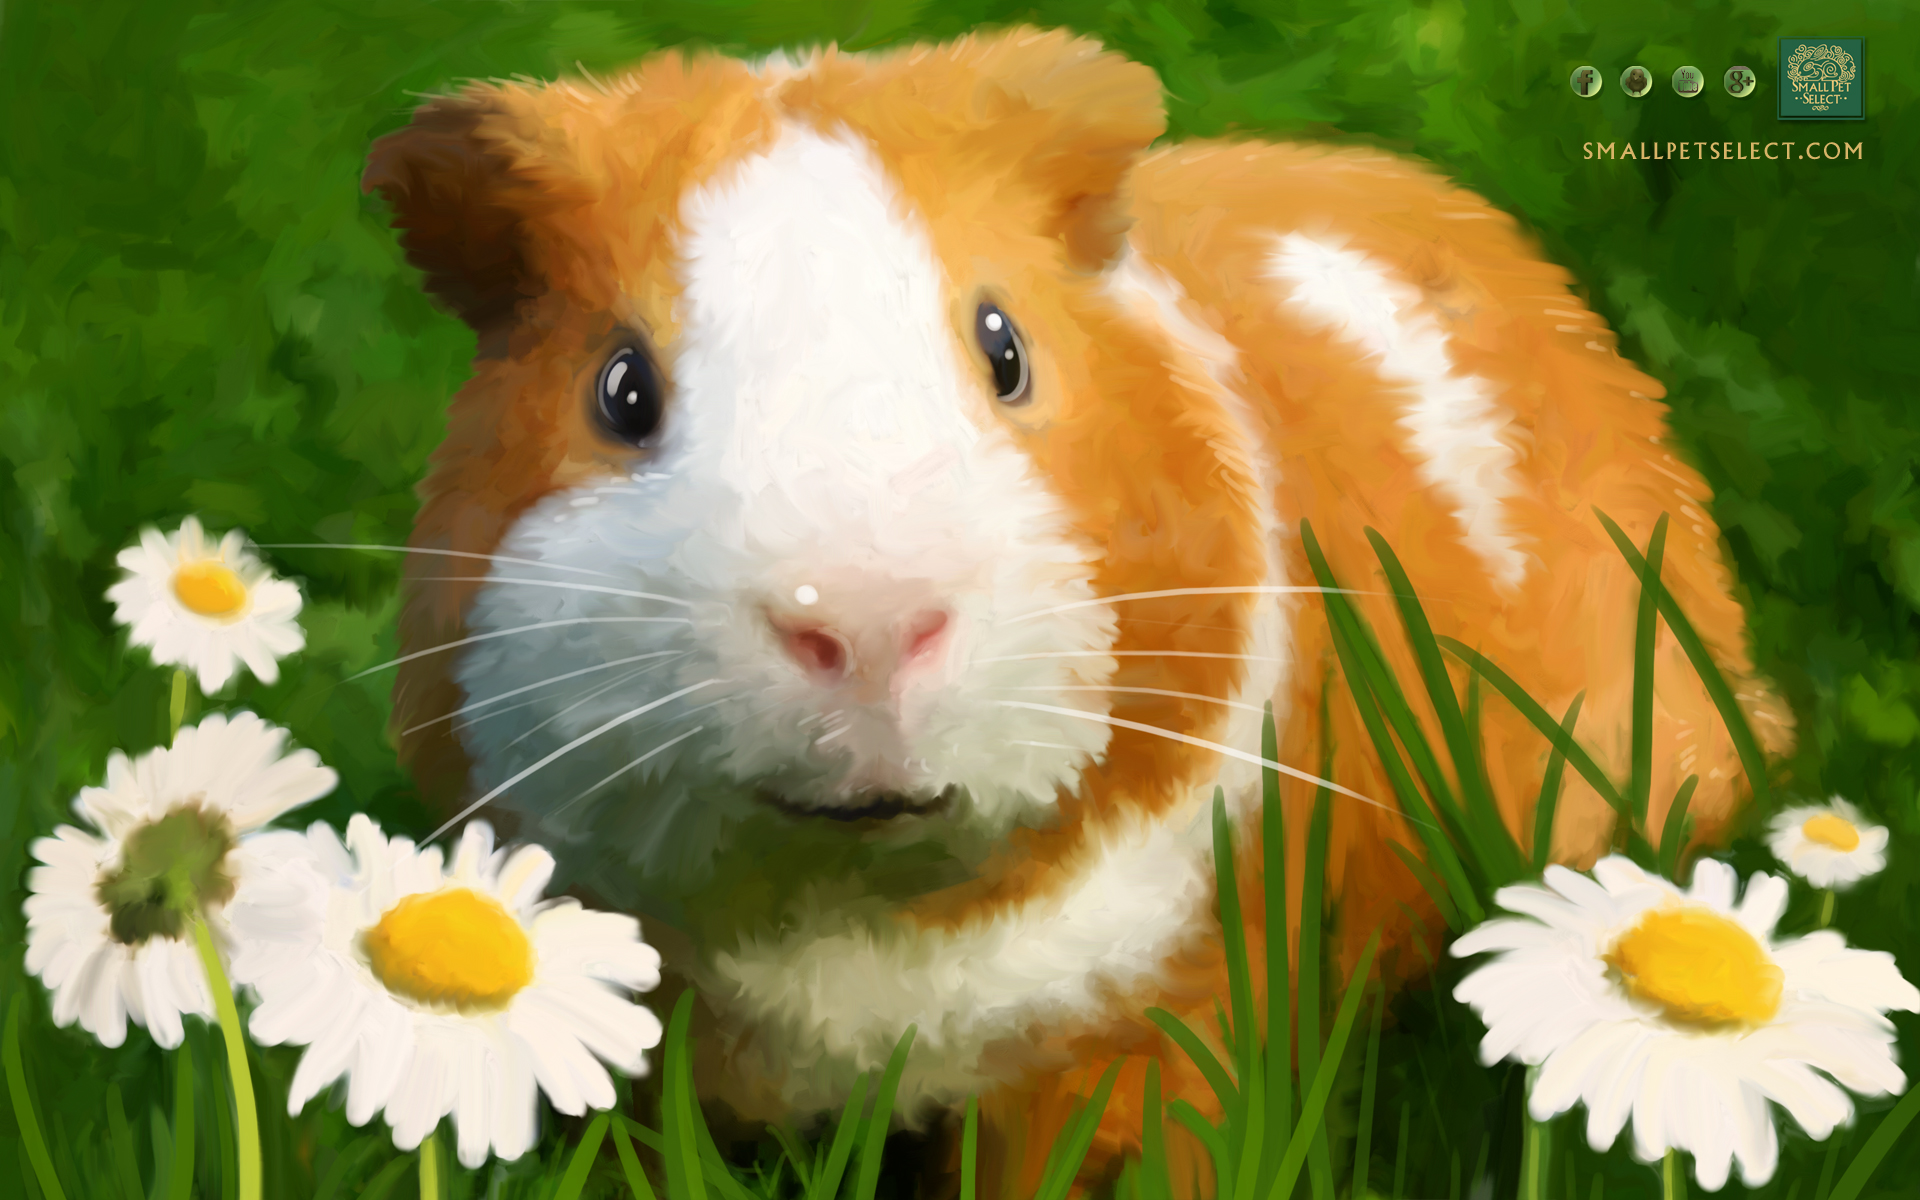 Guinea Pig Wallpaper   Screensaver for your PC MAC Ipad cell phone 1920x1200